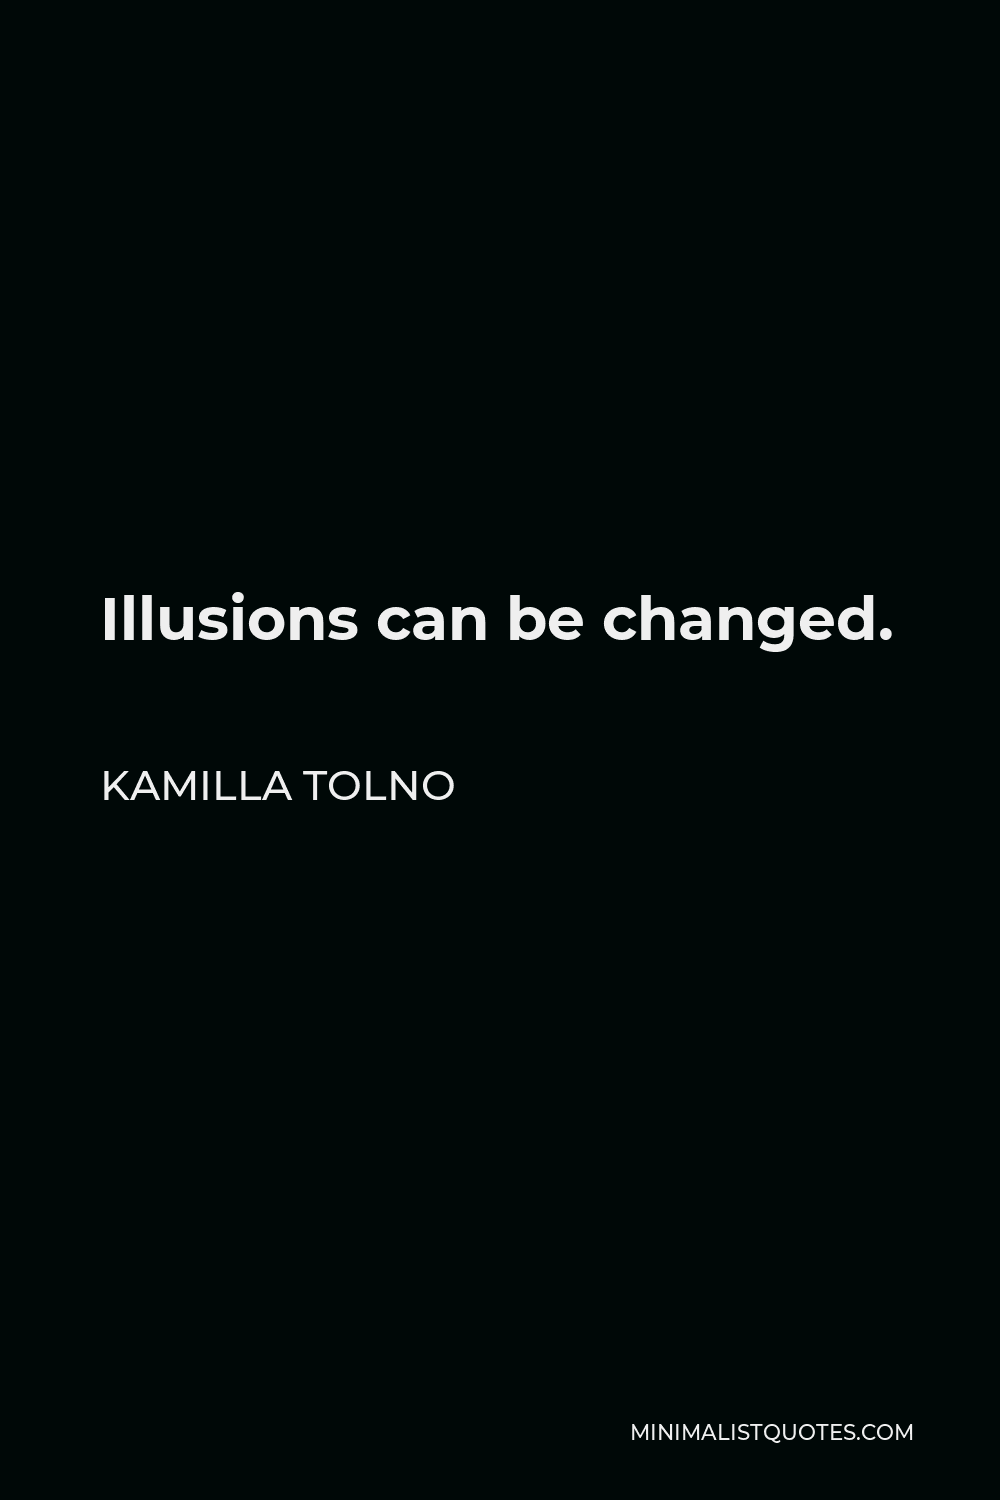 Kamilla Tolno Quote - Illusions can be changed.